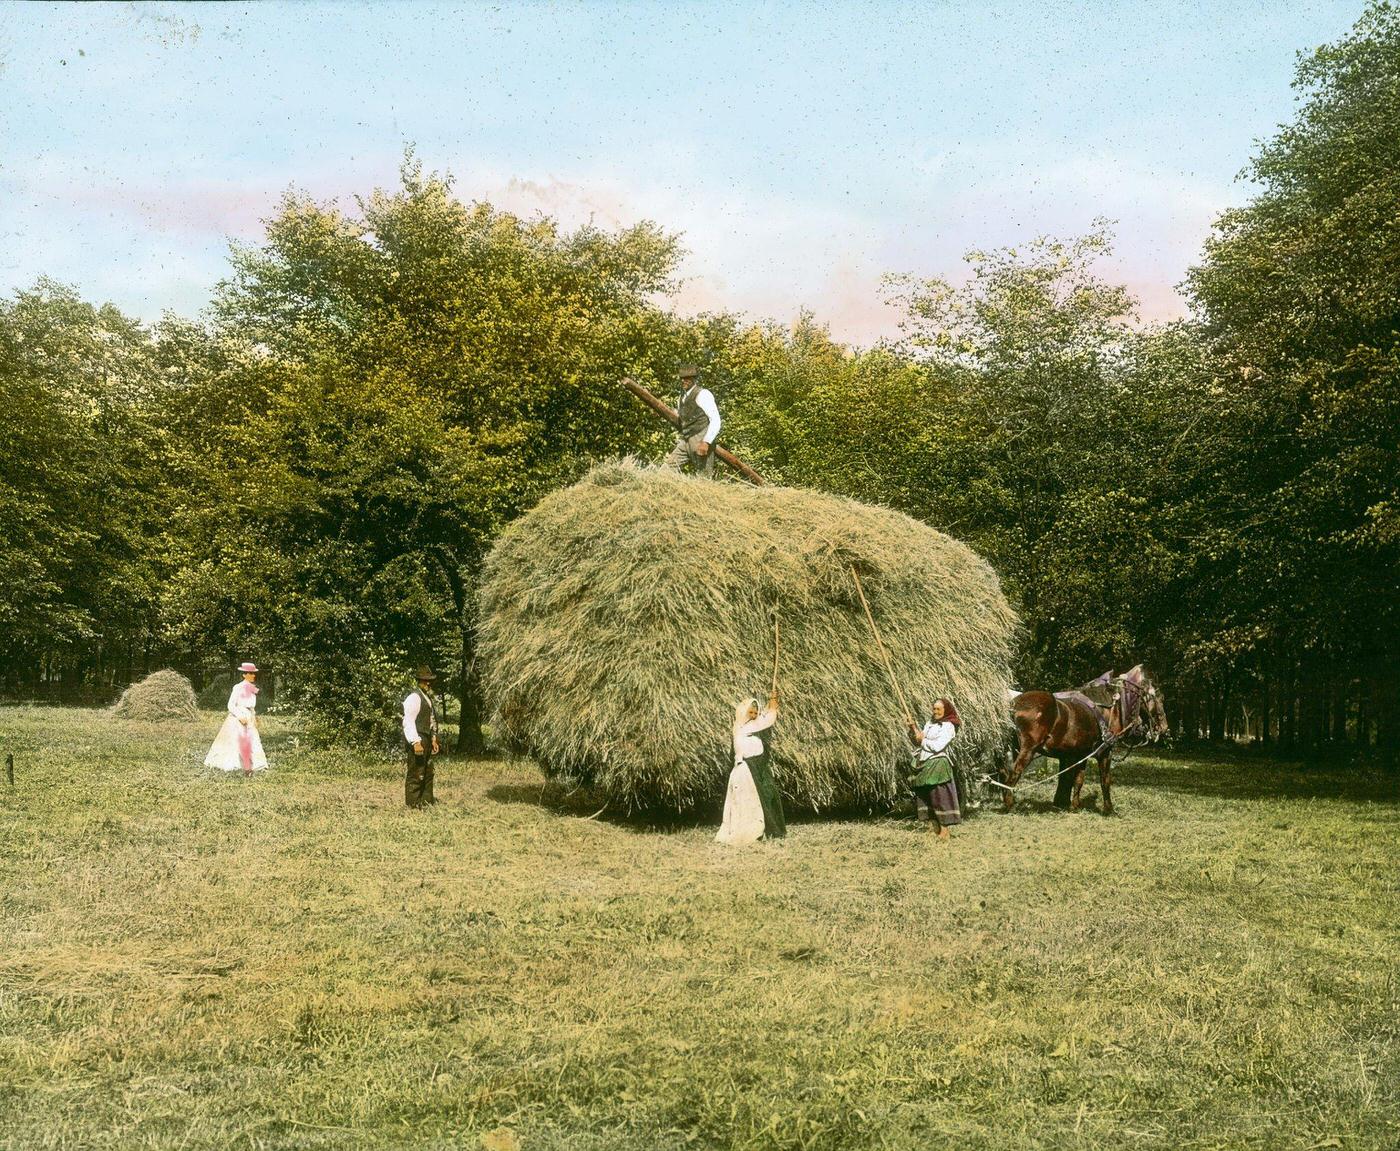 Hay harvest in the Viennese Prater, 1905.